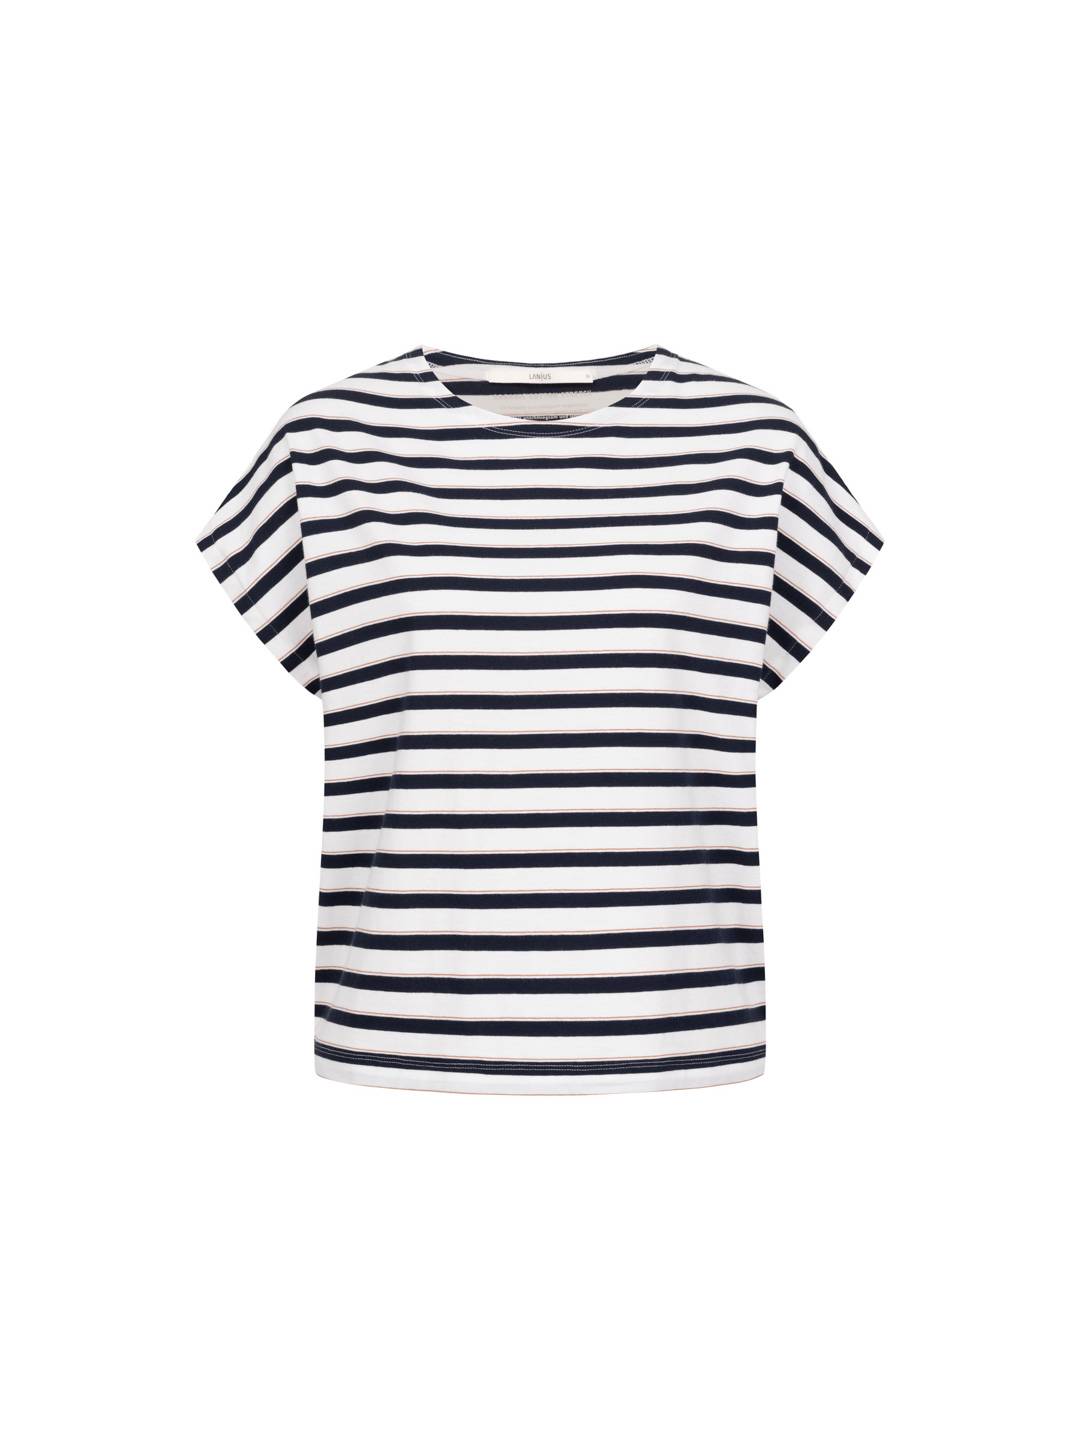 Shirt with stripes from LANIUS